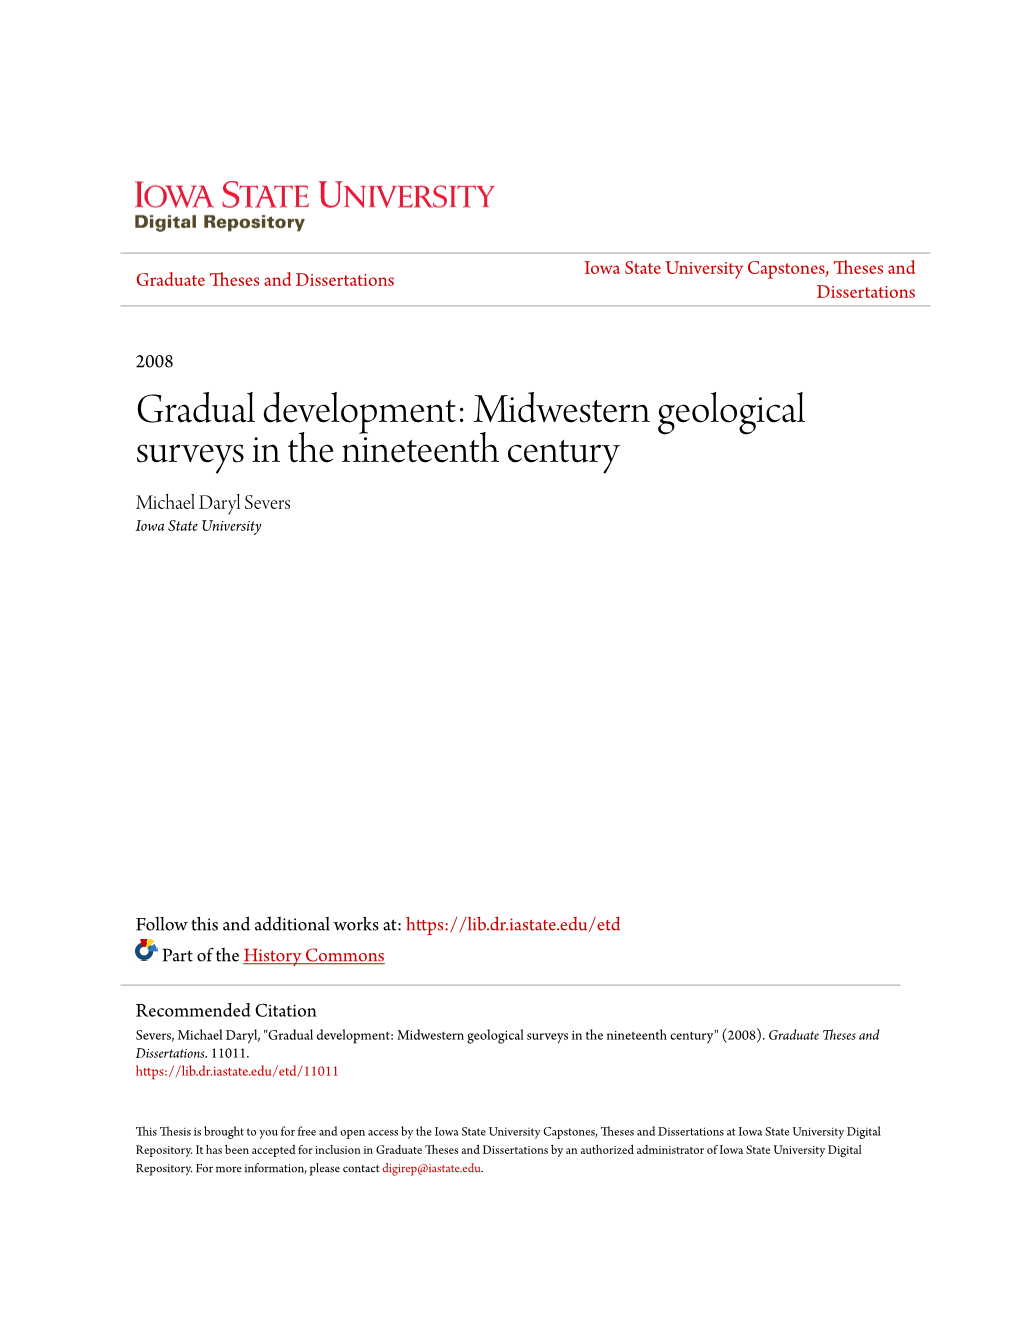 Midwestern Geological Surveys in the Nineteenth Century Michael Daryl Severs Iowa State University